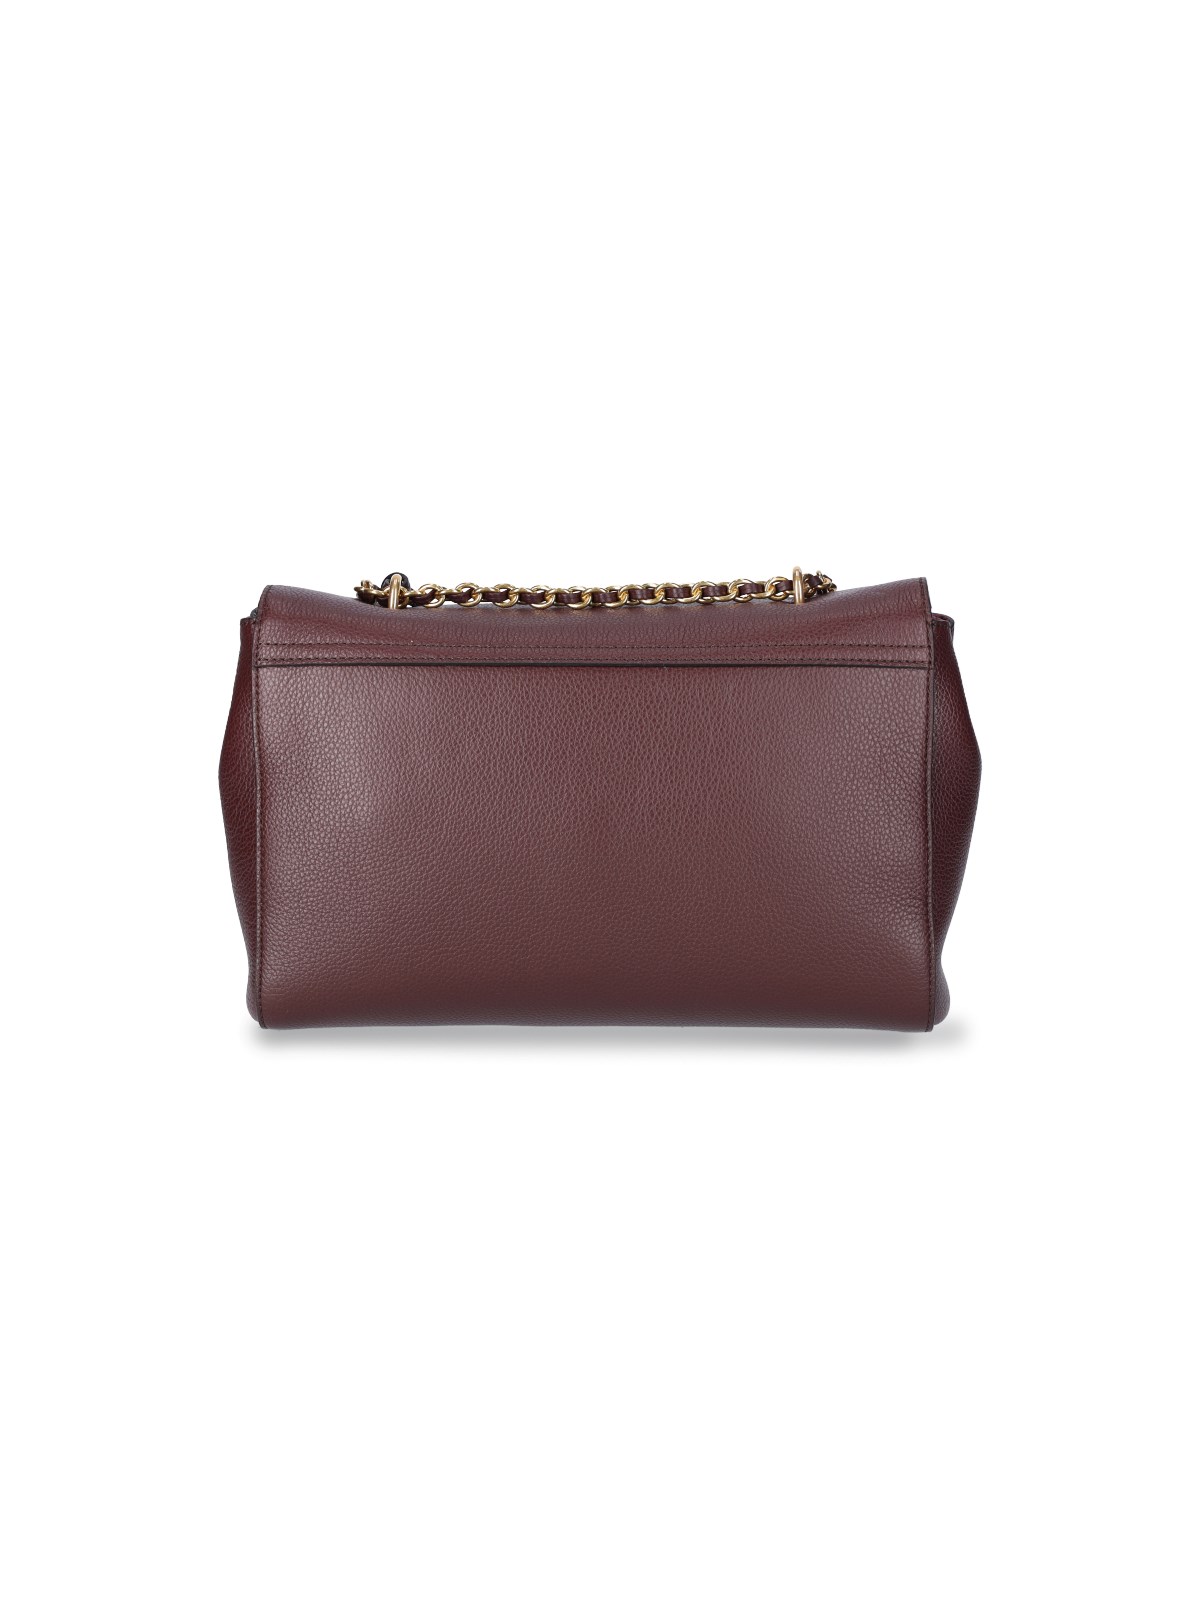 Mulberry Harlow Medium Purse Wallet in Oxblood Small Classic Grain - SOLD